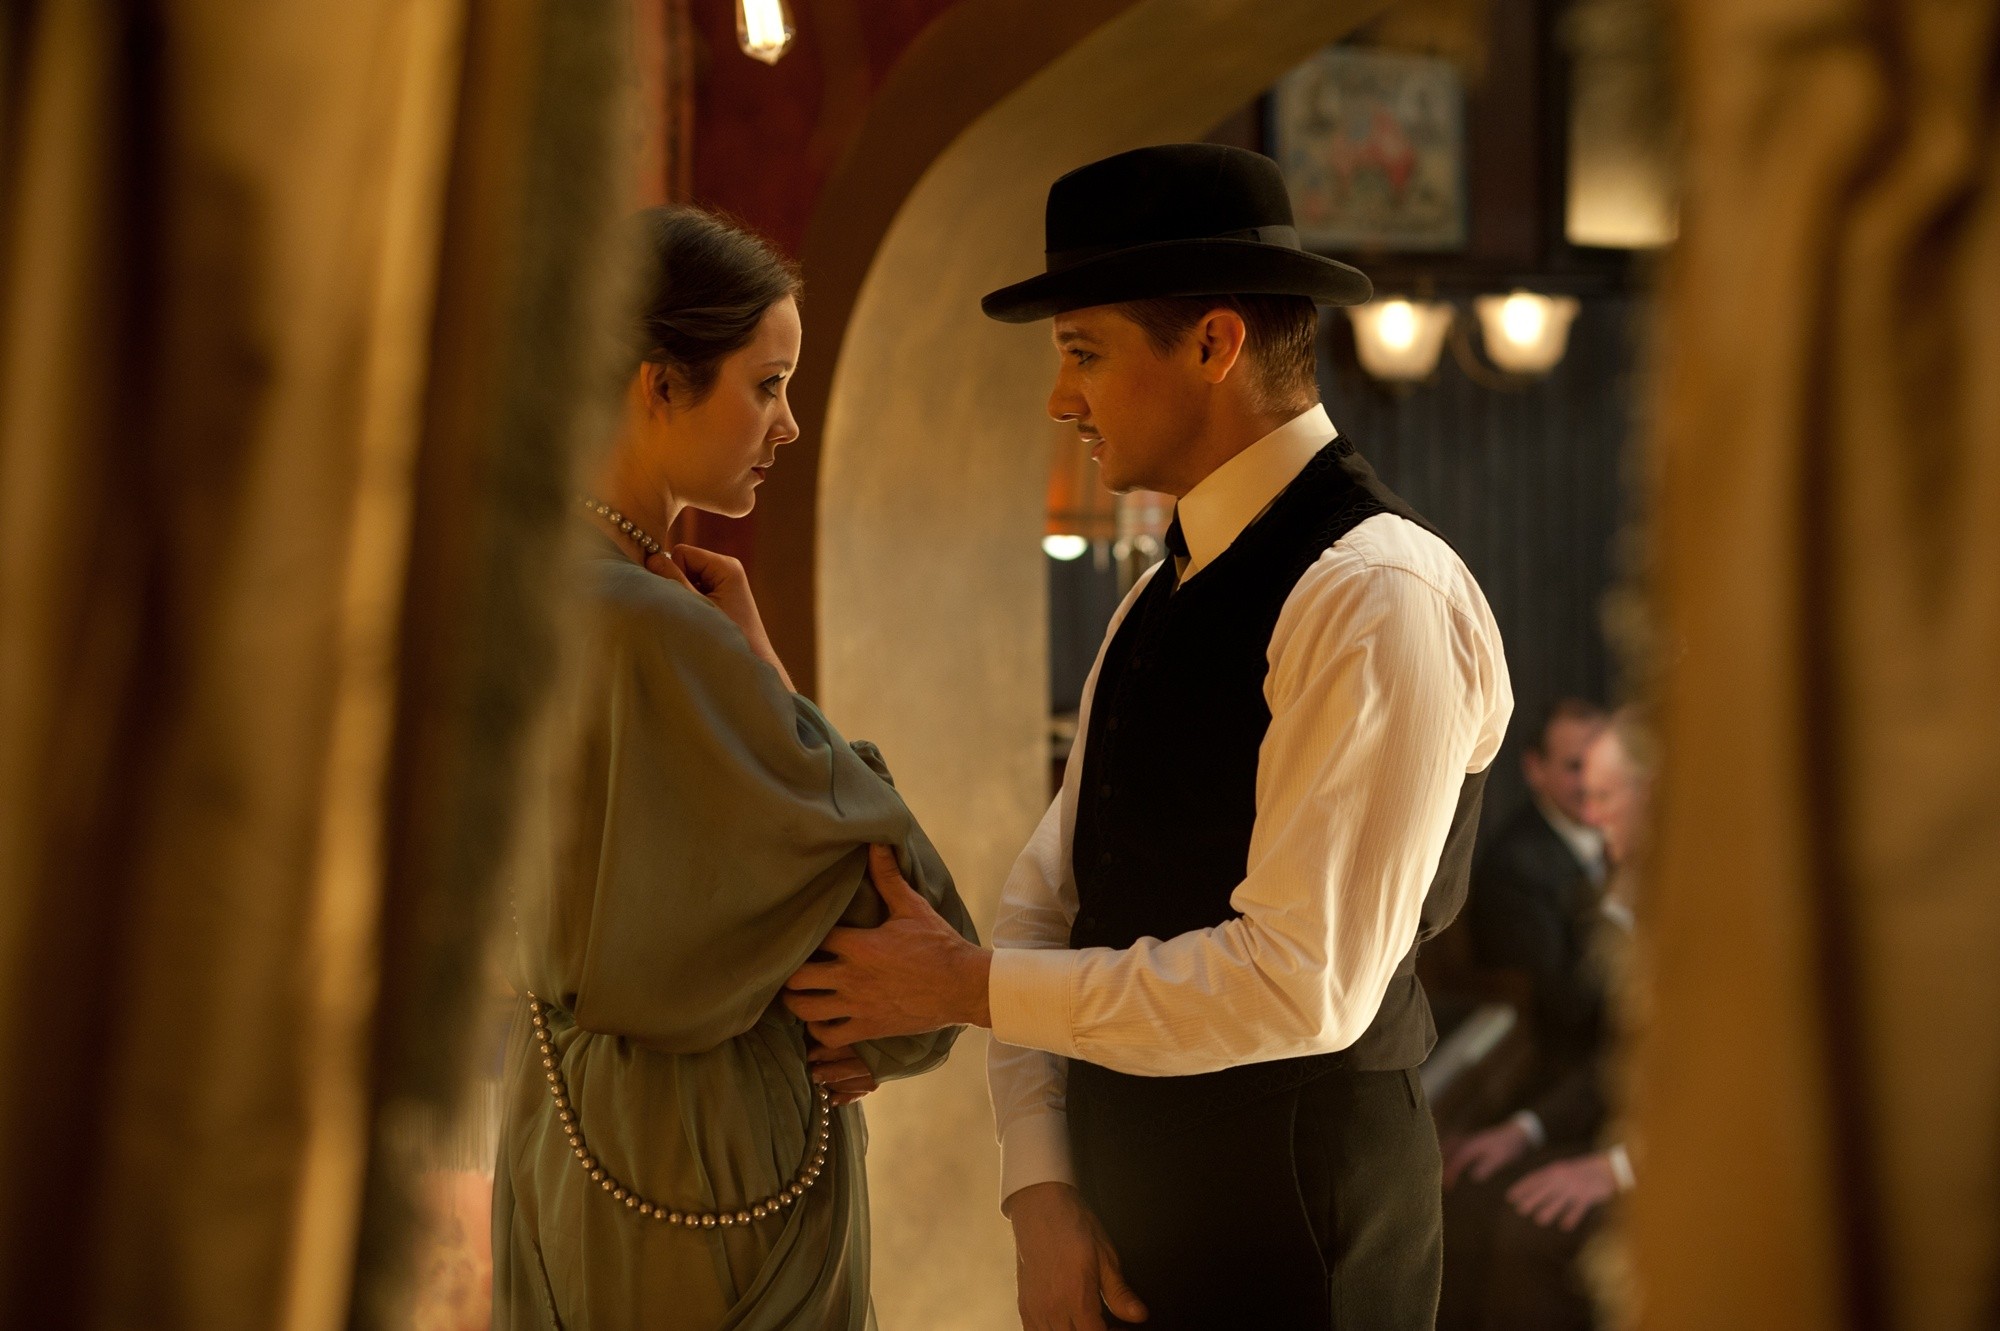 Marion Cotillard stars as Ewa Cybulski and Jeremy Renner stars as Orlando the Magician in The Weinstein Company's The Immigrant (2014)